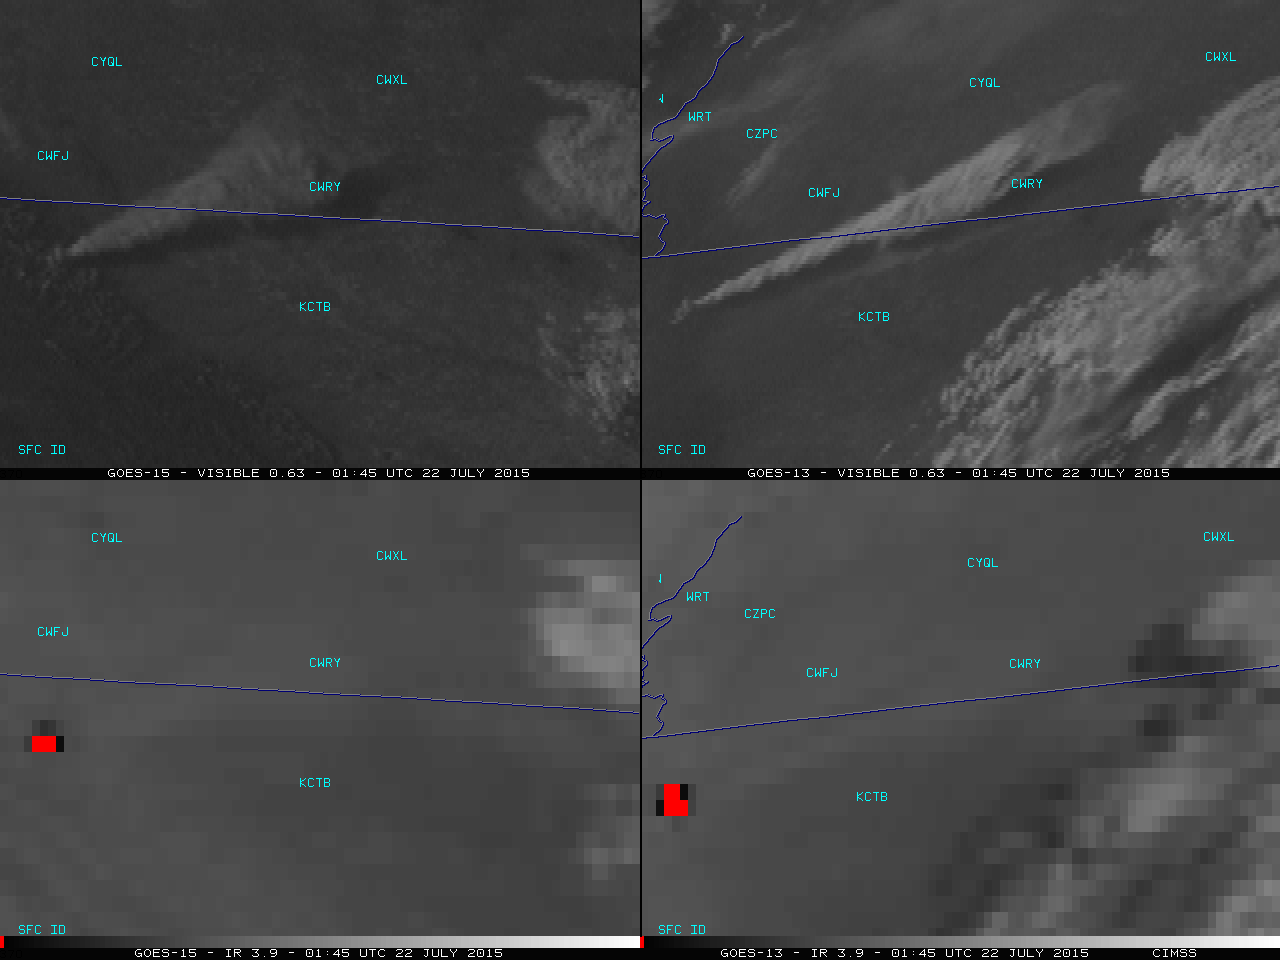 GOES-15 (left) and GOES-13 (right) visible and shorwave IR images [click to play animation]